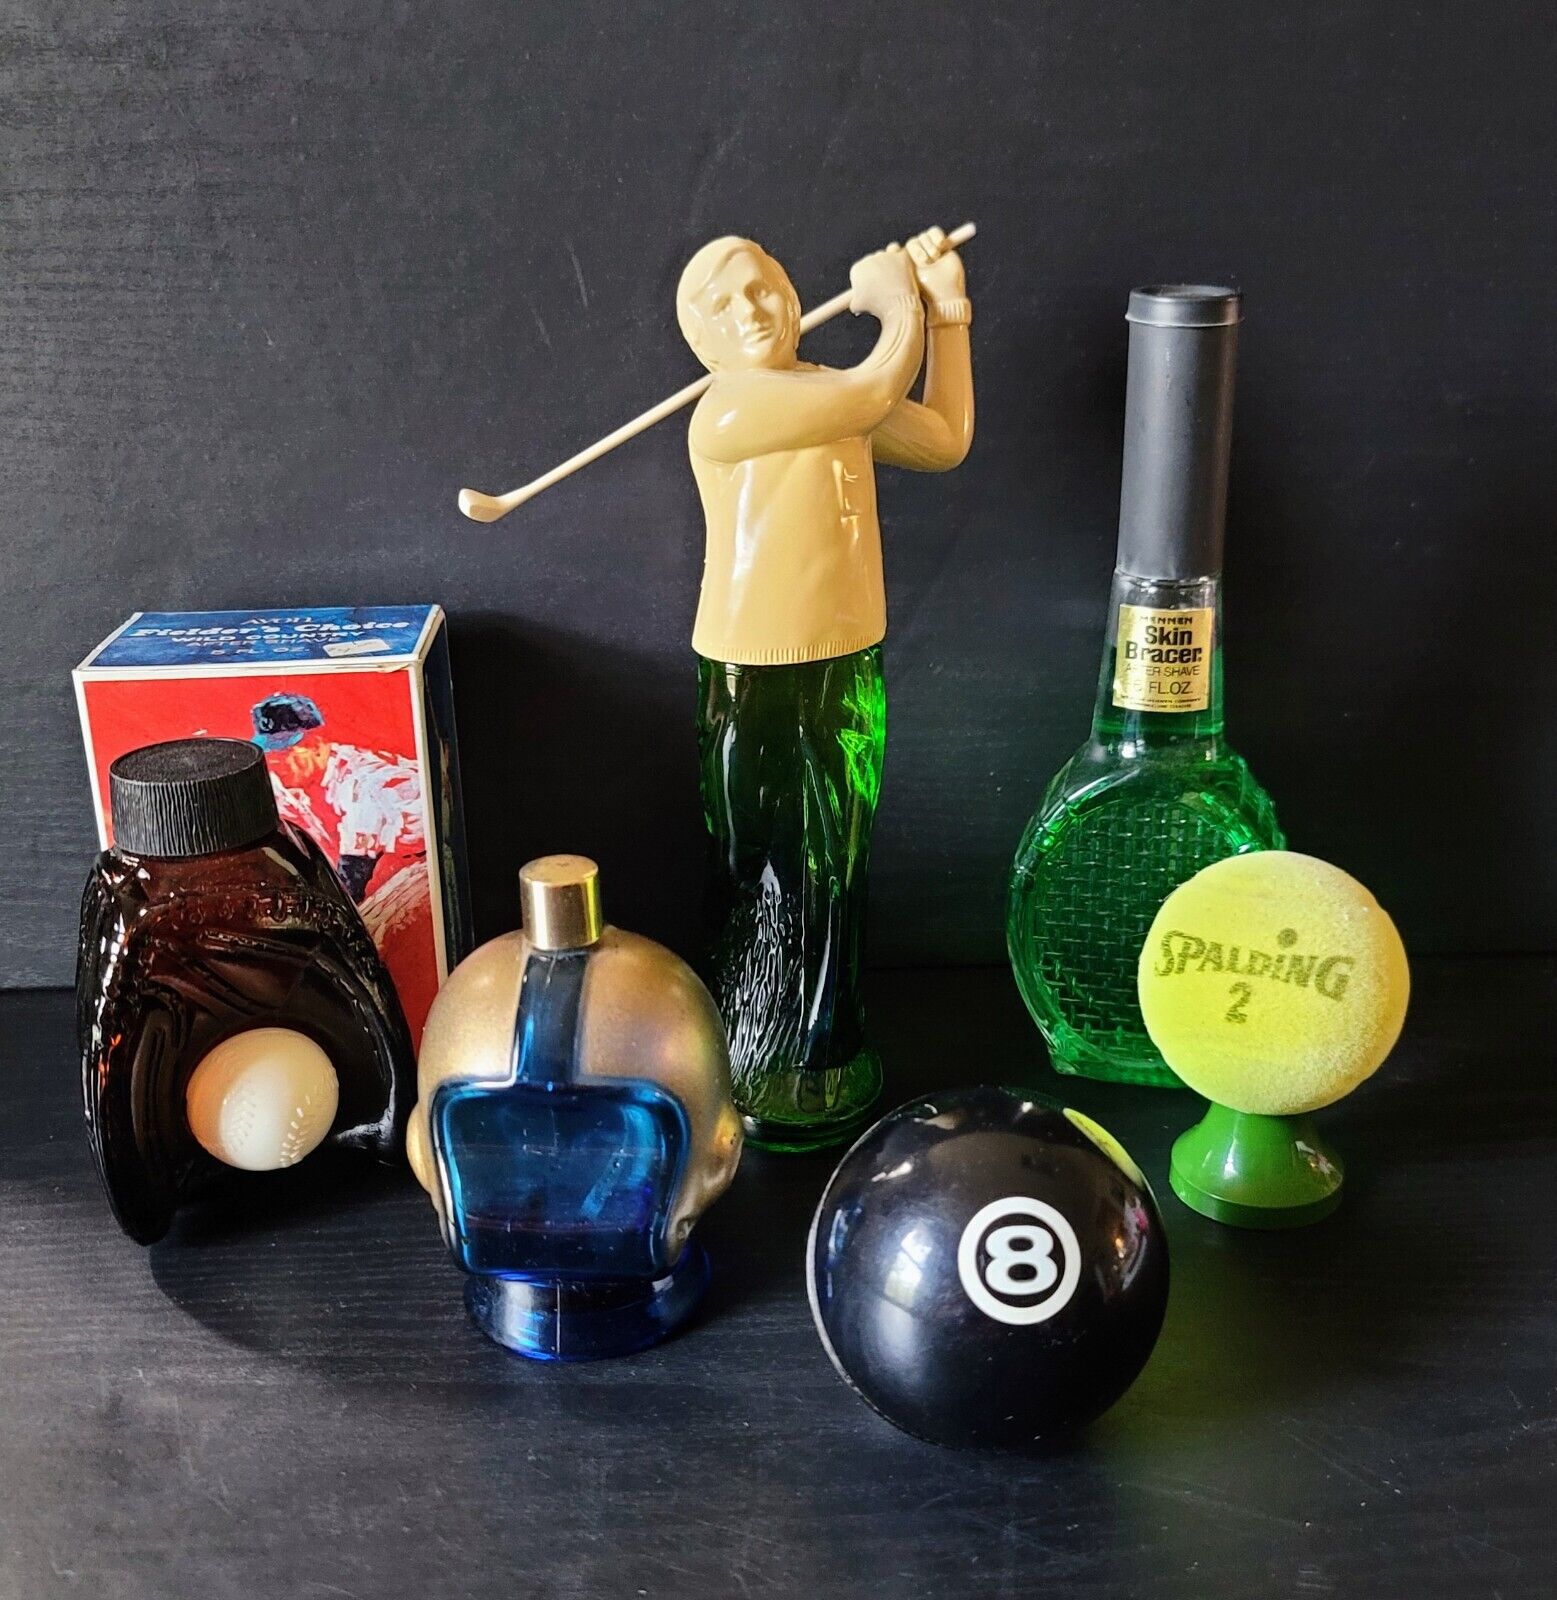 AVON SPORTS BOTTLES/DECANTERS FOOTBALL GOLF TENNIS POOL BASEBALL 2 w/AFTER SHAVE